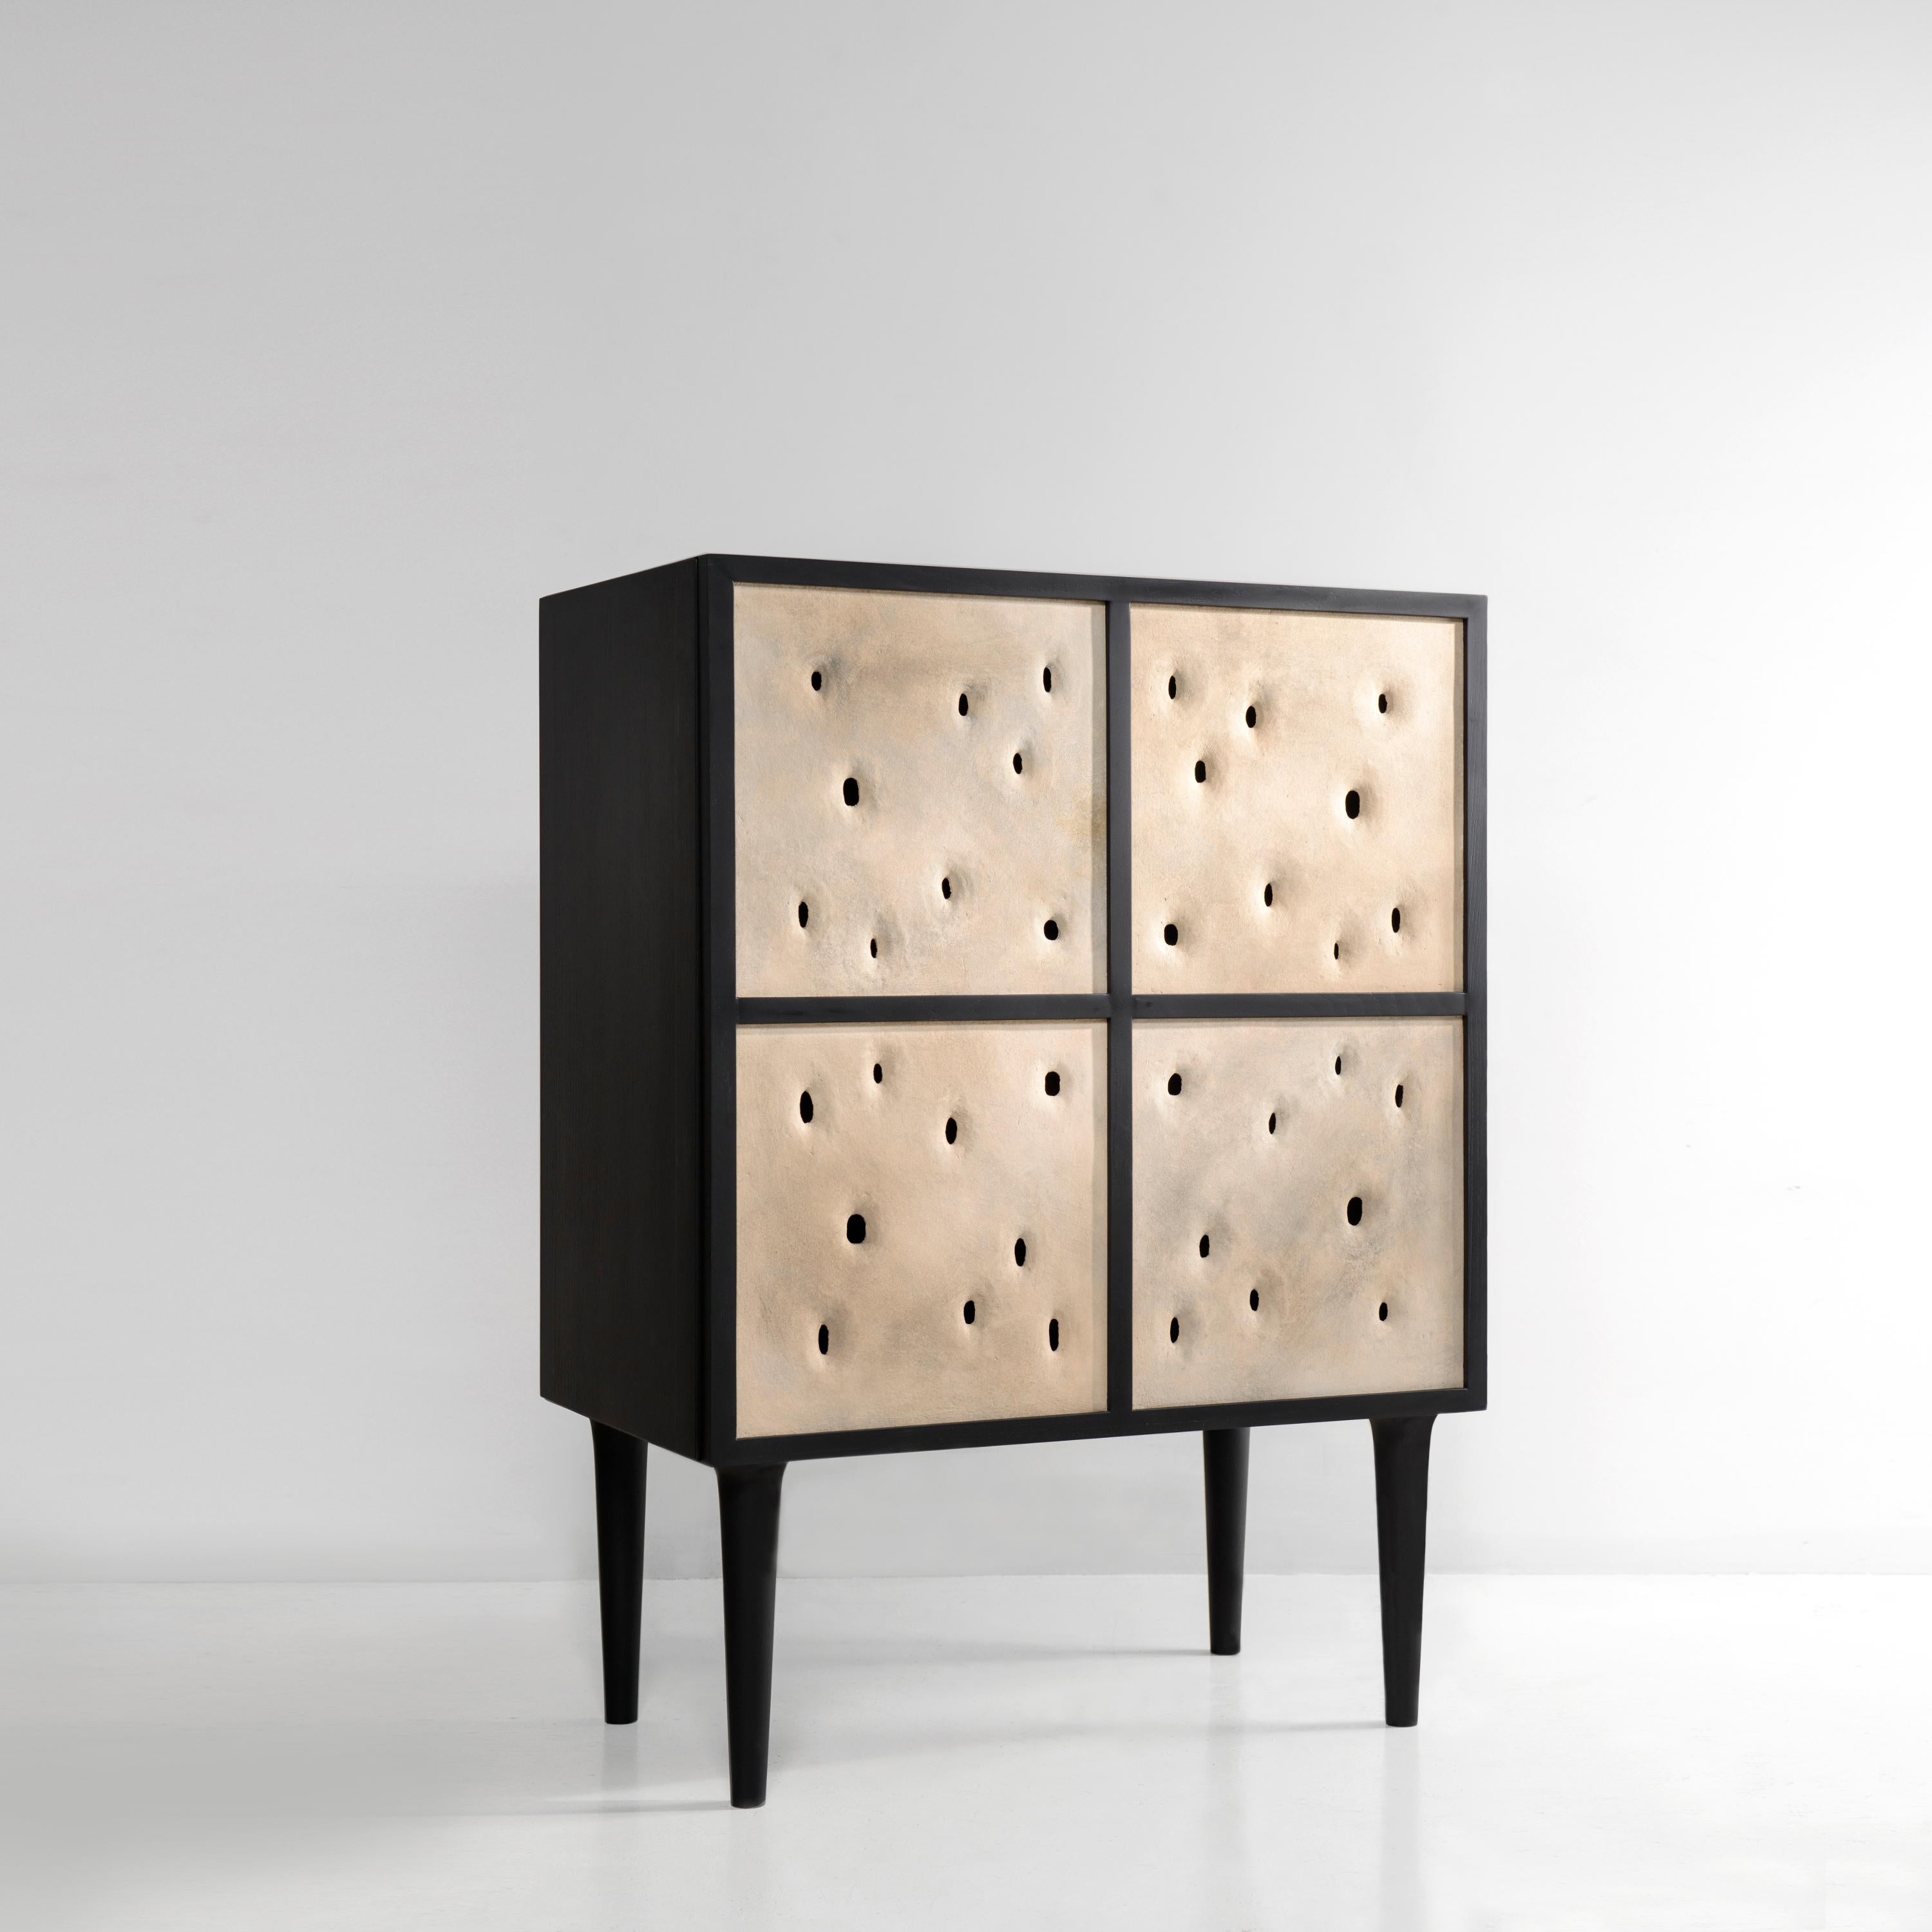 Clay Black Ceramic Contemporary Bar Cabinet by Faina For Sale